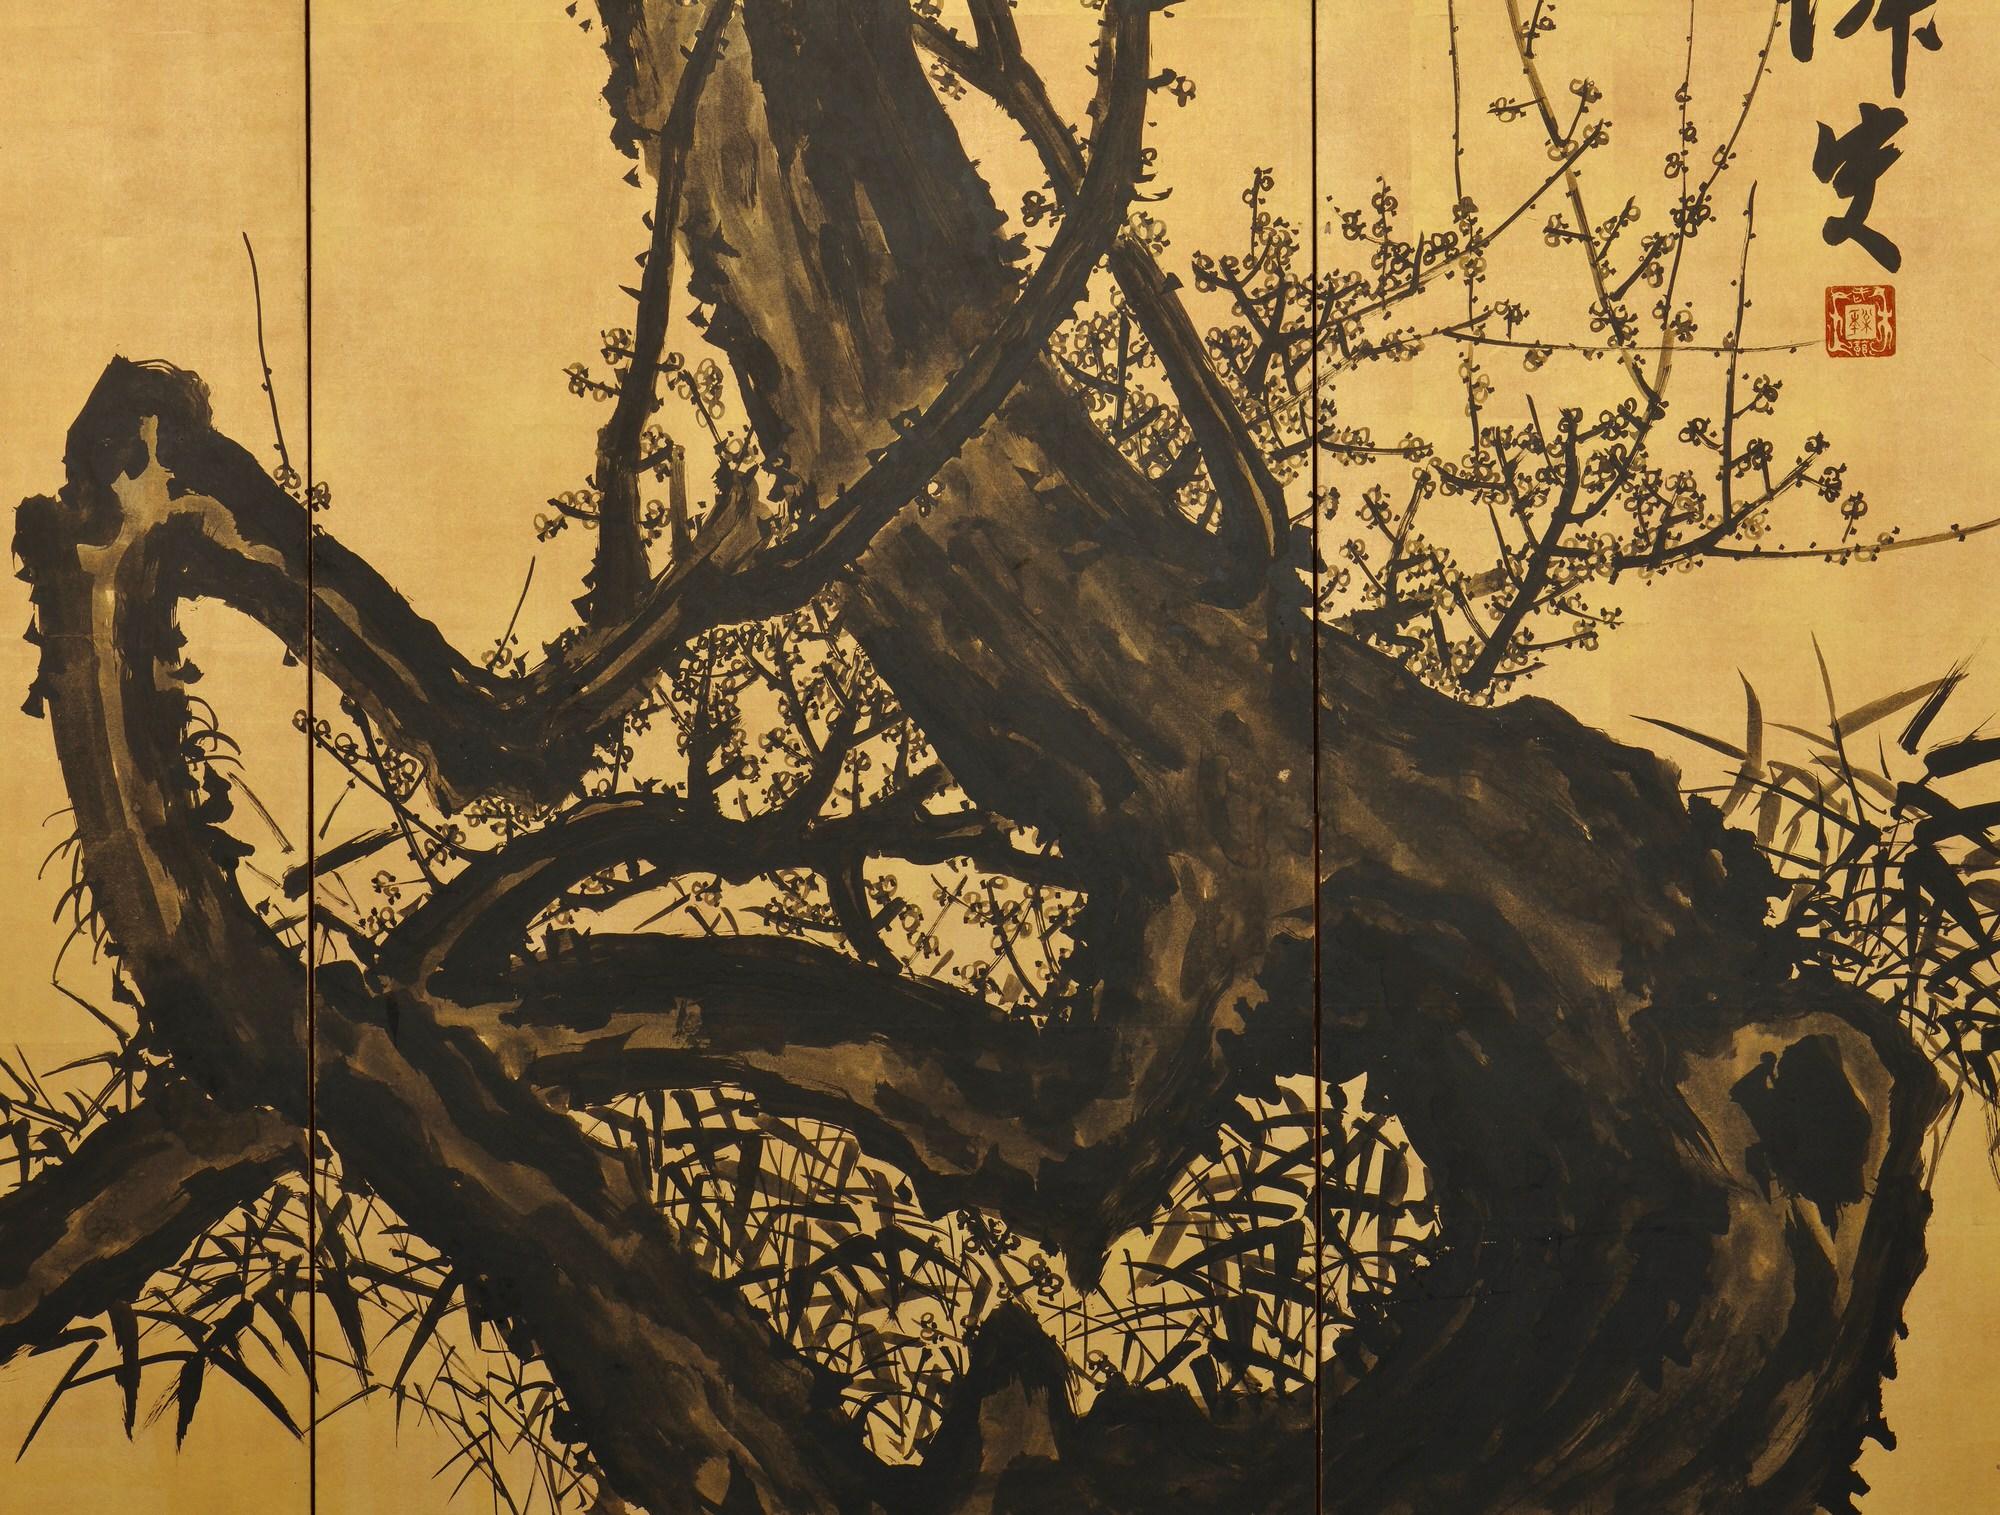 Hand-Painted Meiji Period Japanese Pine and Plum Screens by Suzuki Shonen, Ink on Gold Leaf